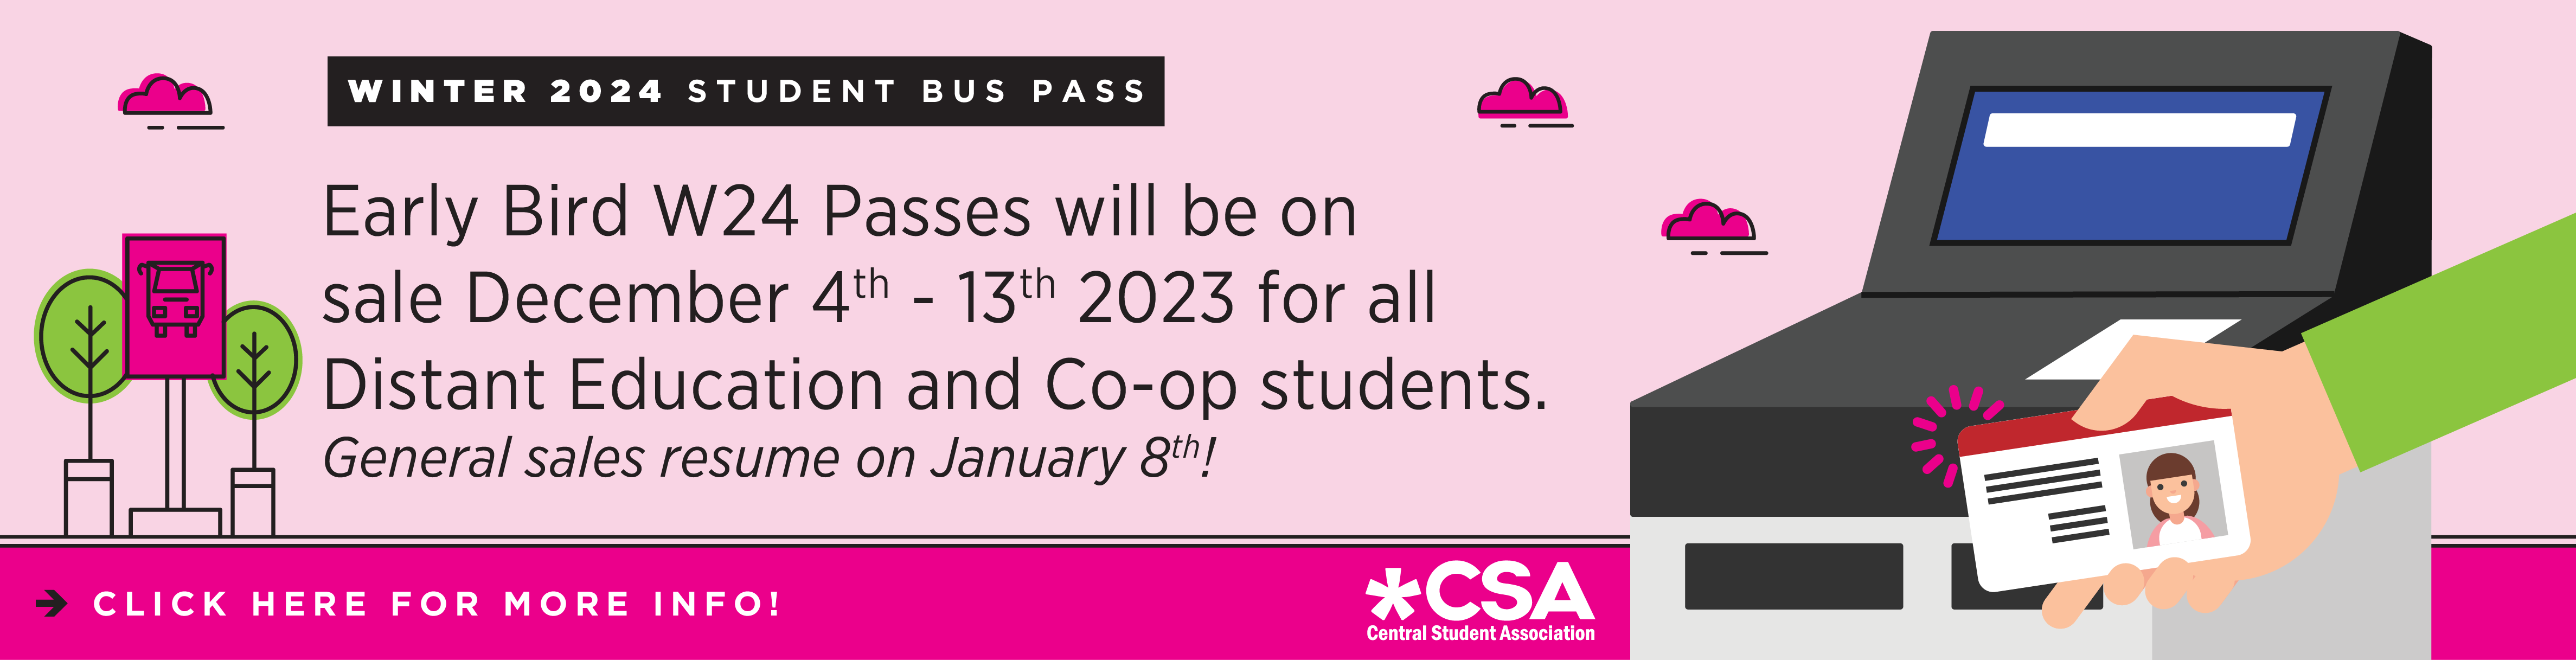 Winter 2024 Student Bus Pass Early Bird W24 Passes will be on sale December 4 - 13 2023 for all Distant Education and Coop Students! General Sales resume Jan 8th